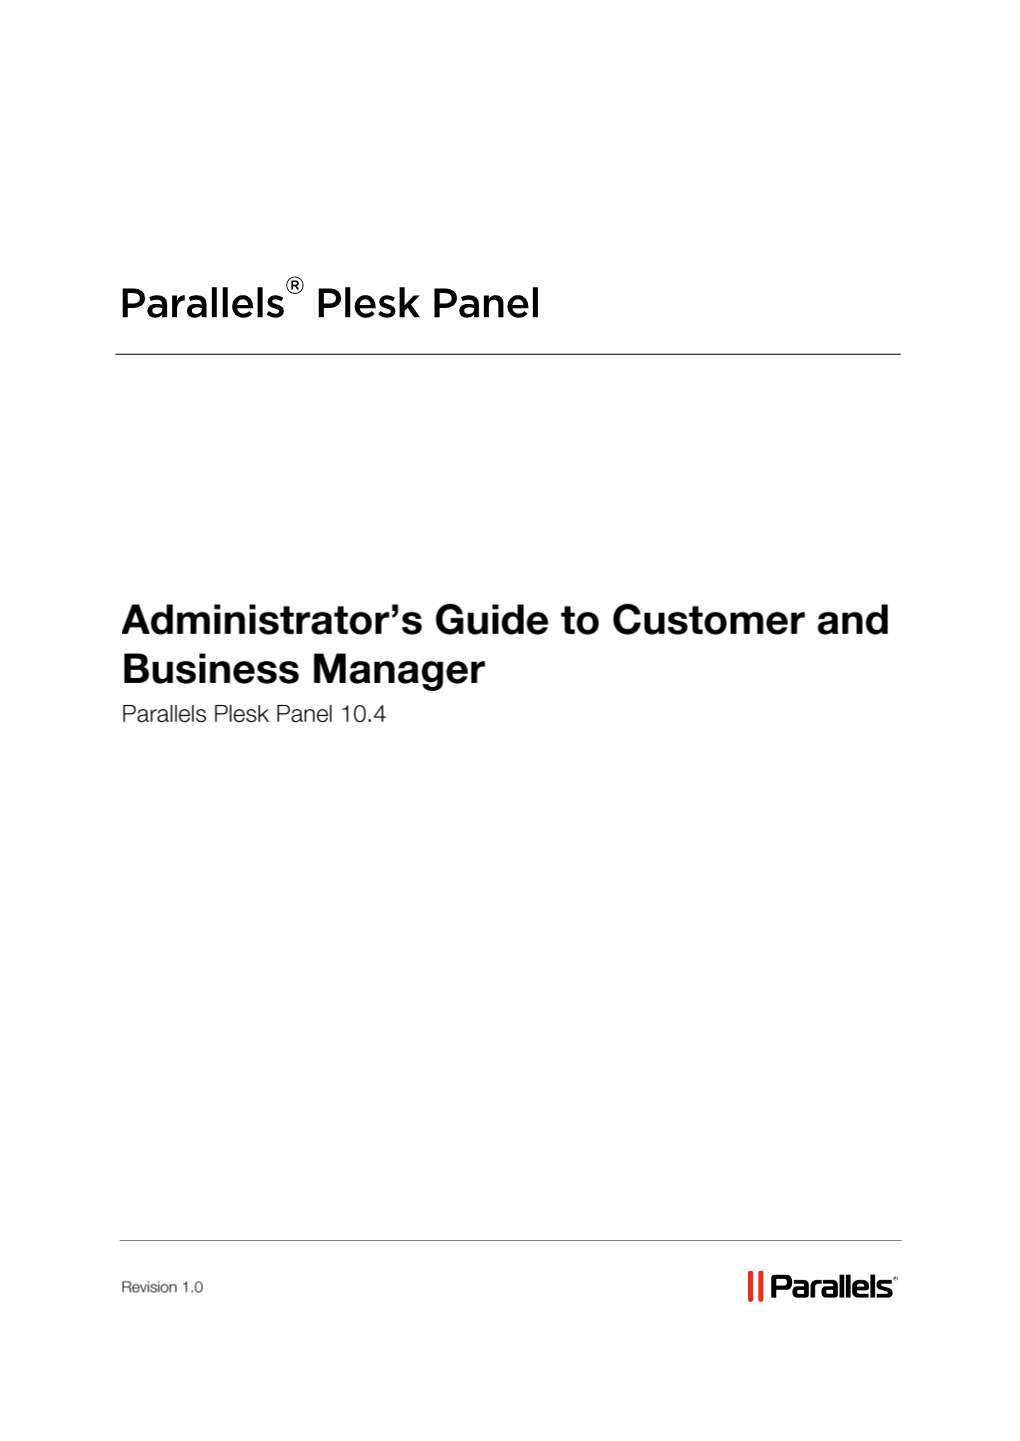 Administrator's Guide to Customer and Business Manager